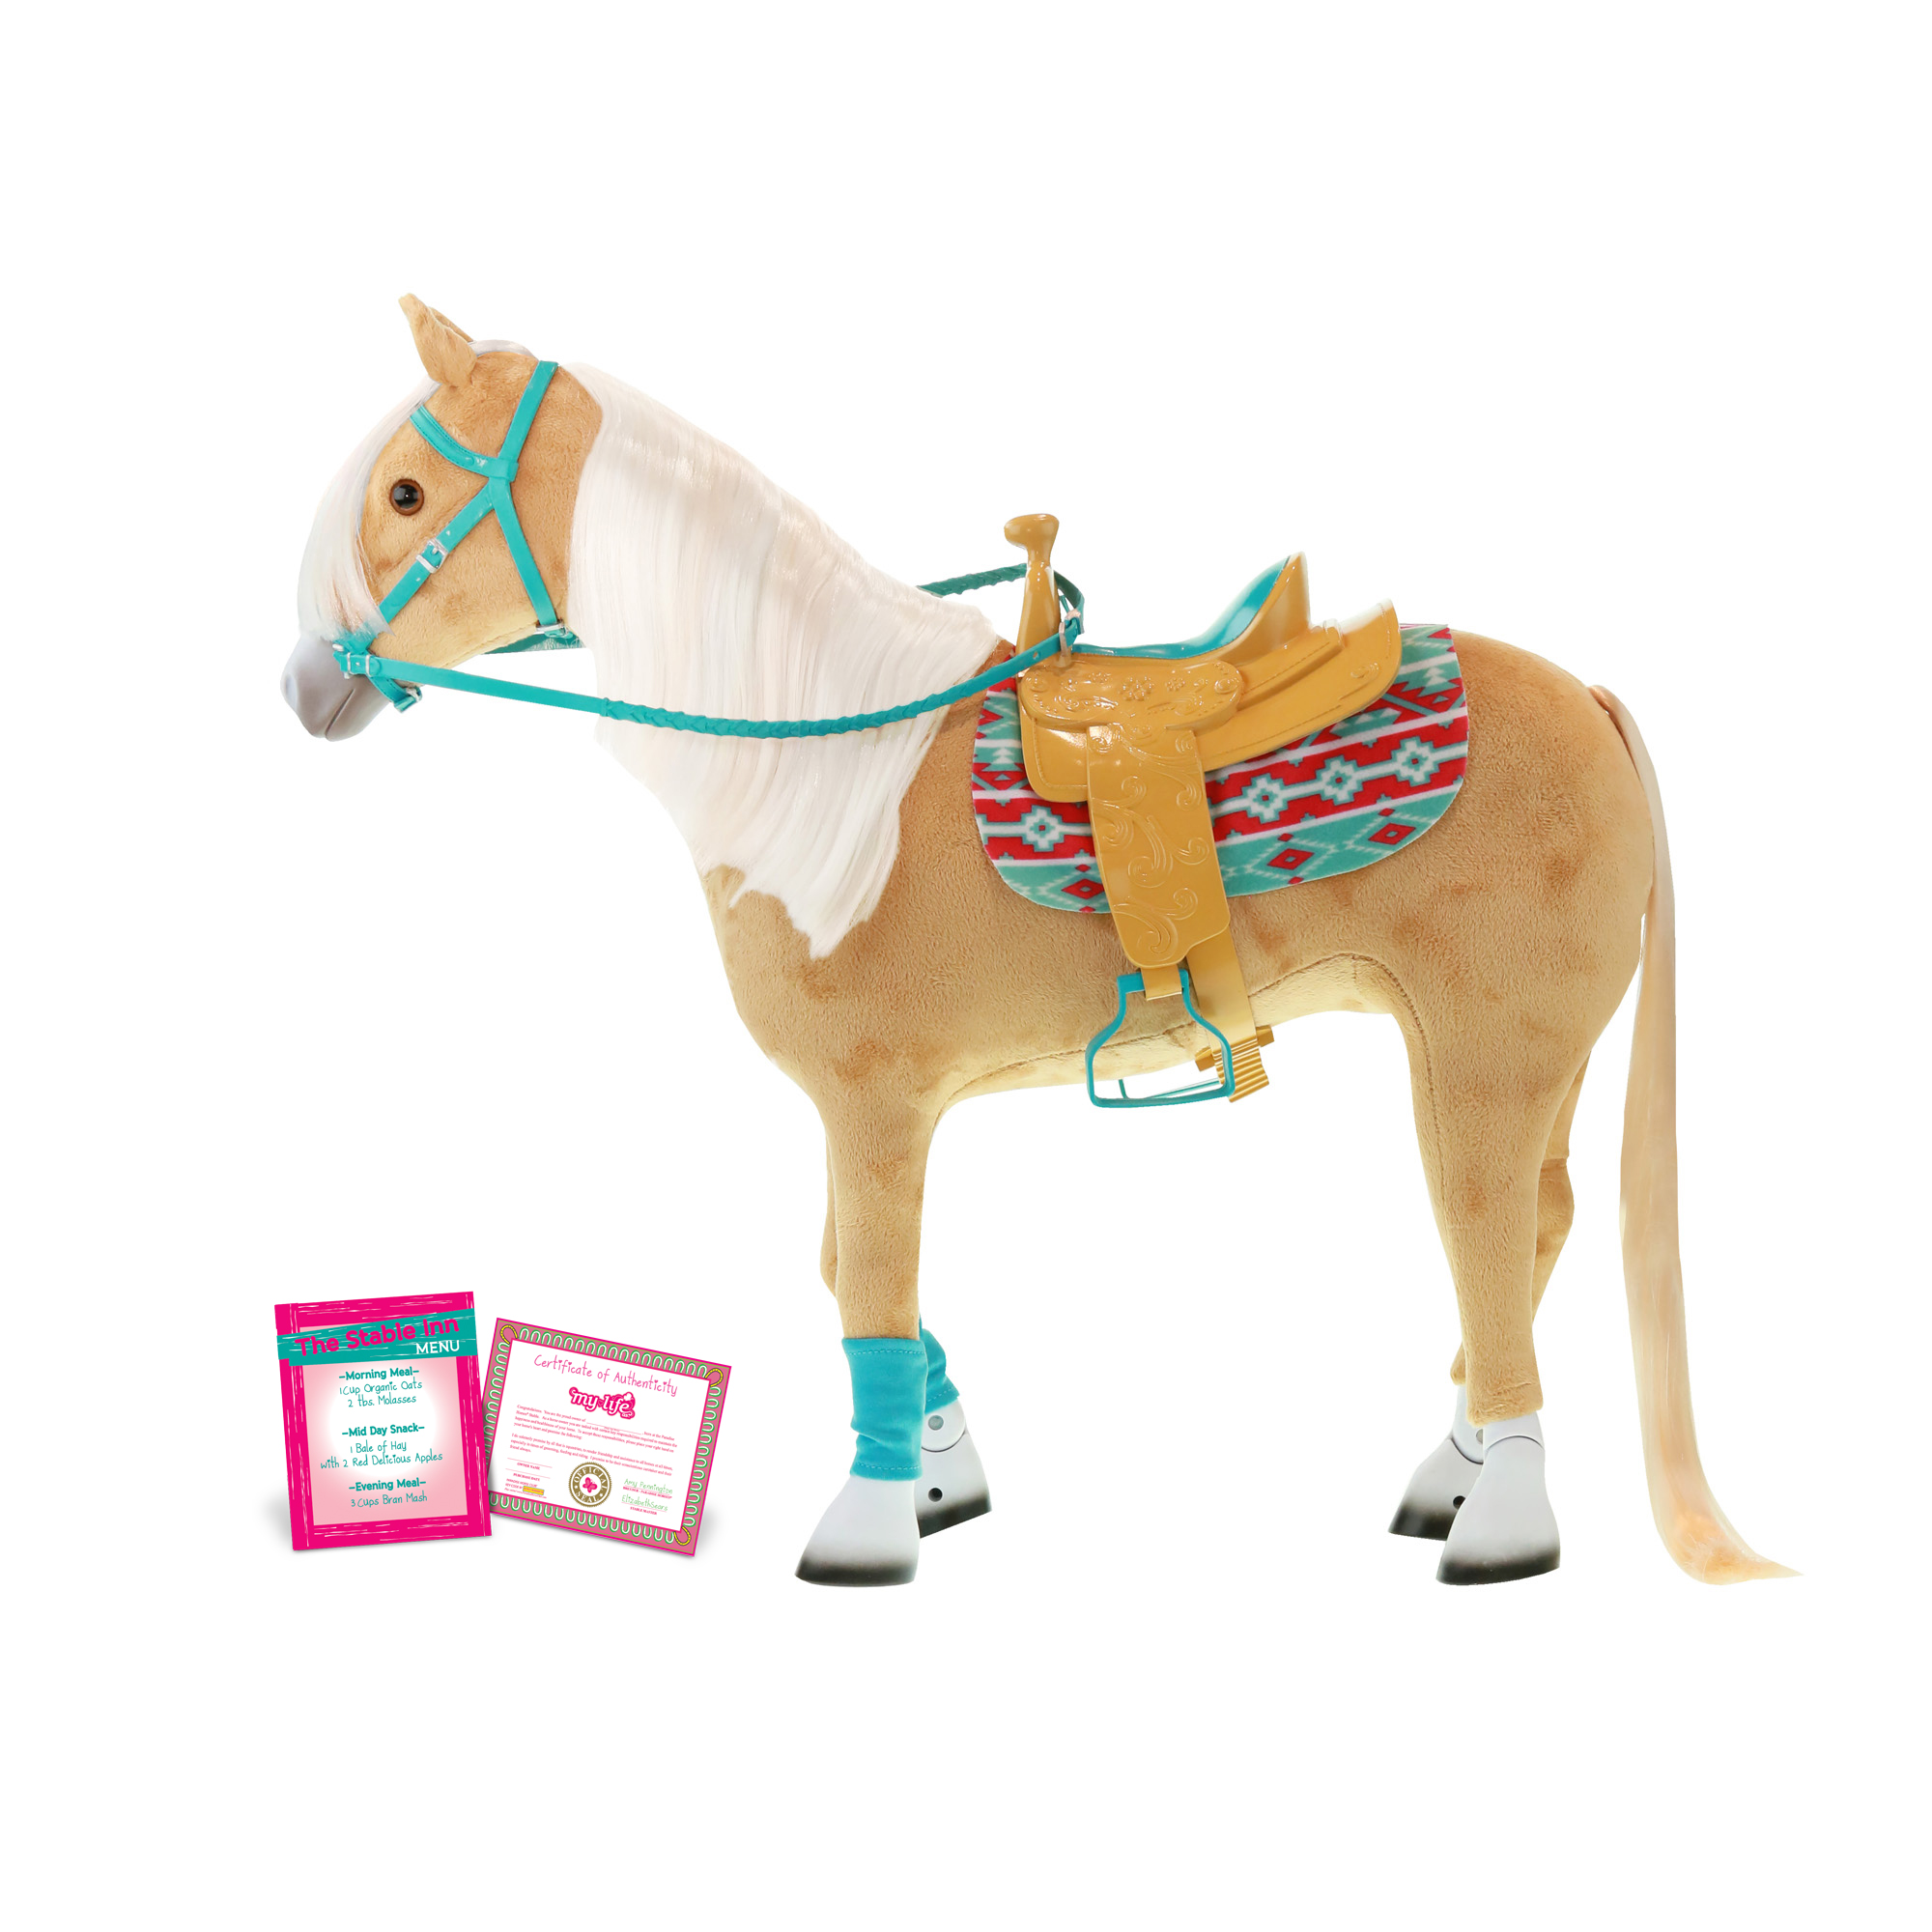 My Life As Poseable Horse Play Set Doll Accessories, 9 Pieces - image 2 of 2